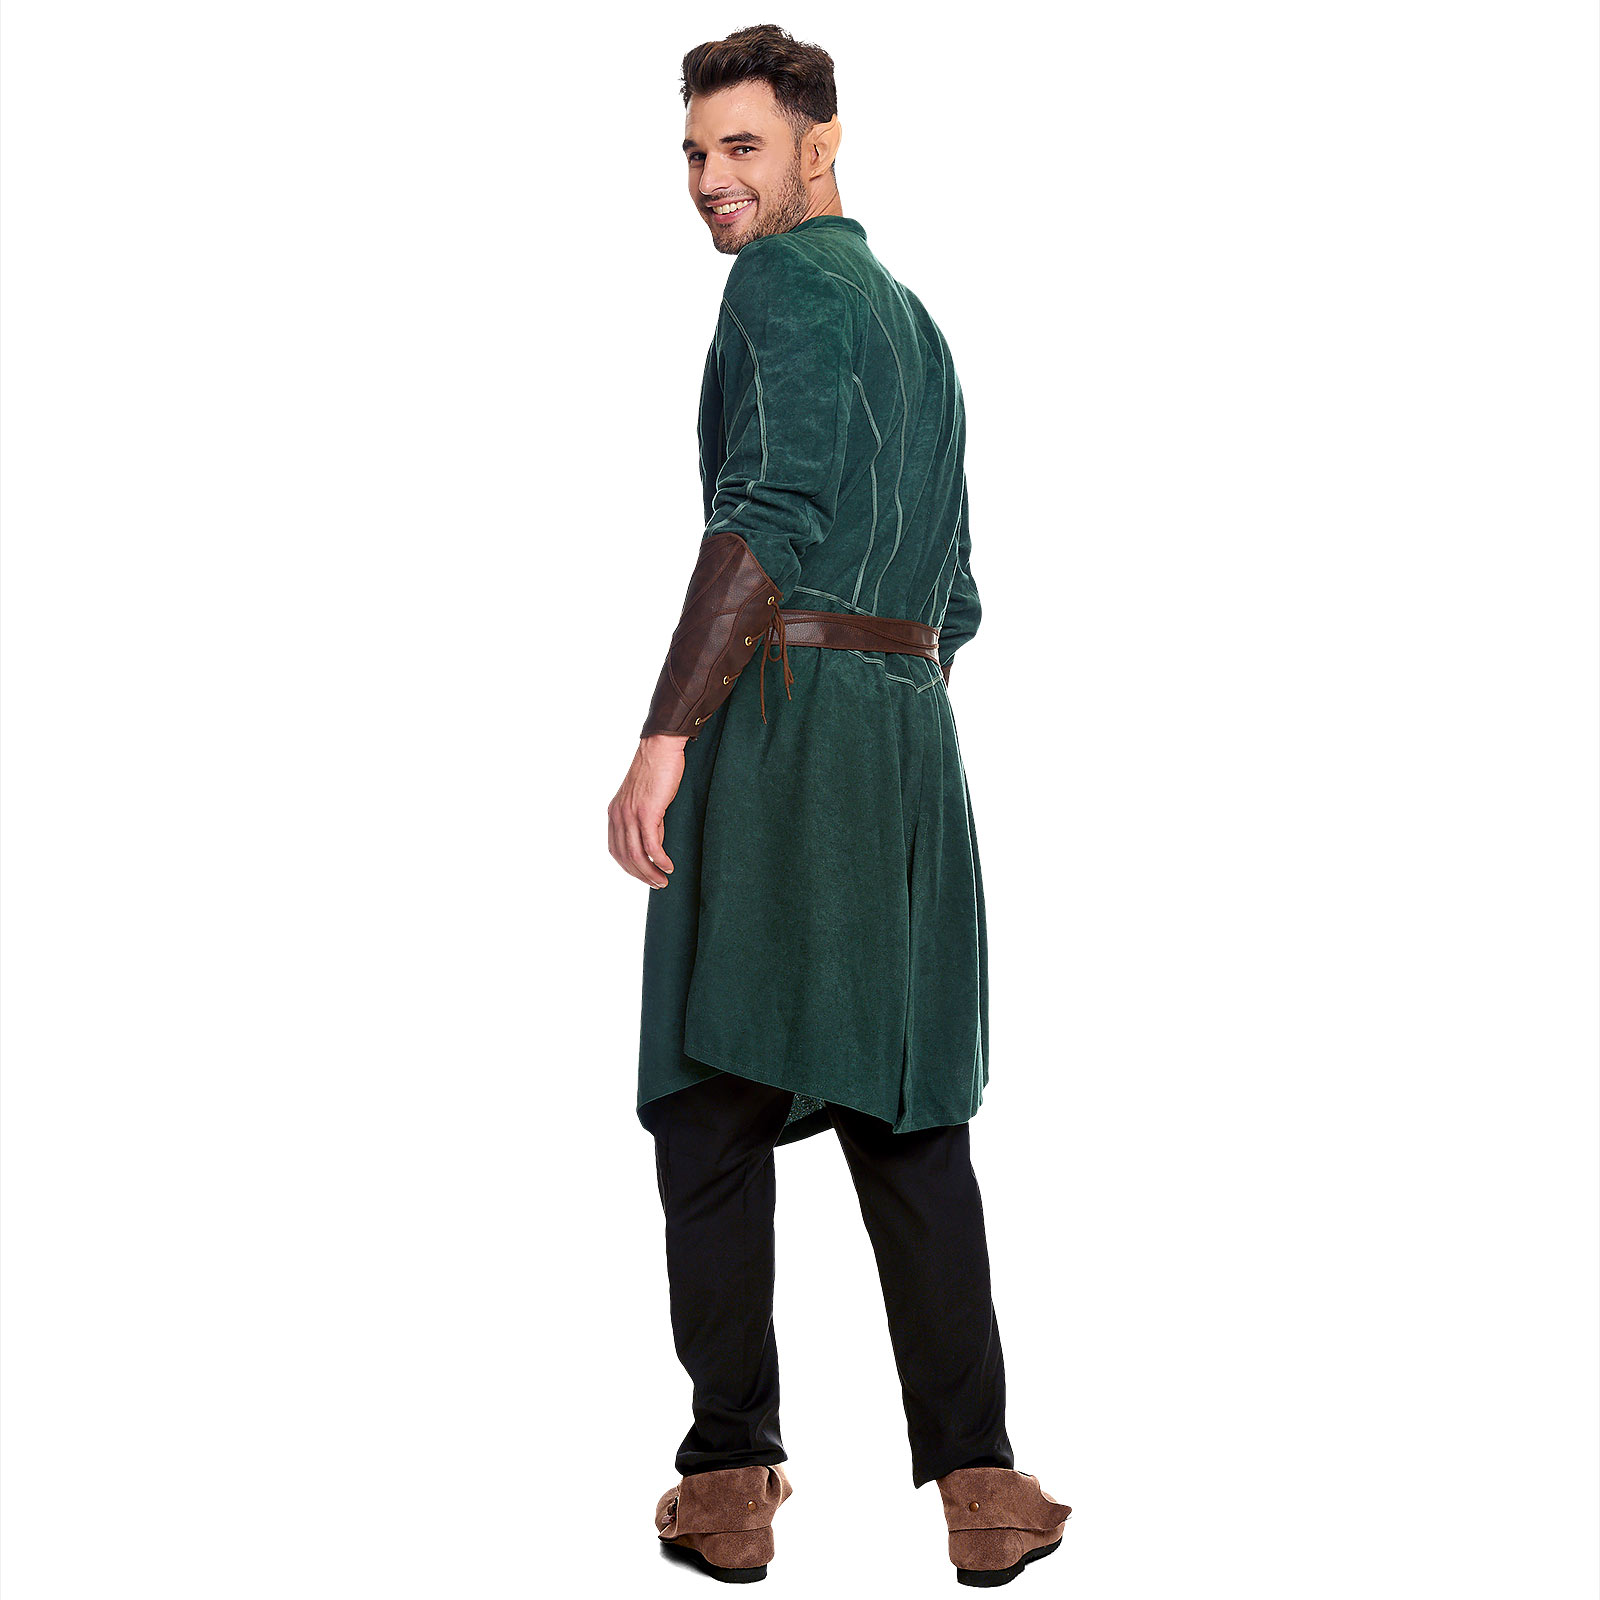 Legolas Elf Costume for Lord of the Rings Fans